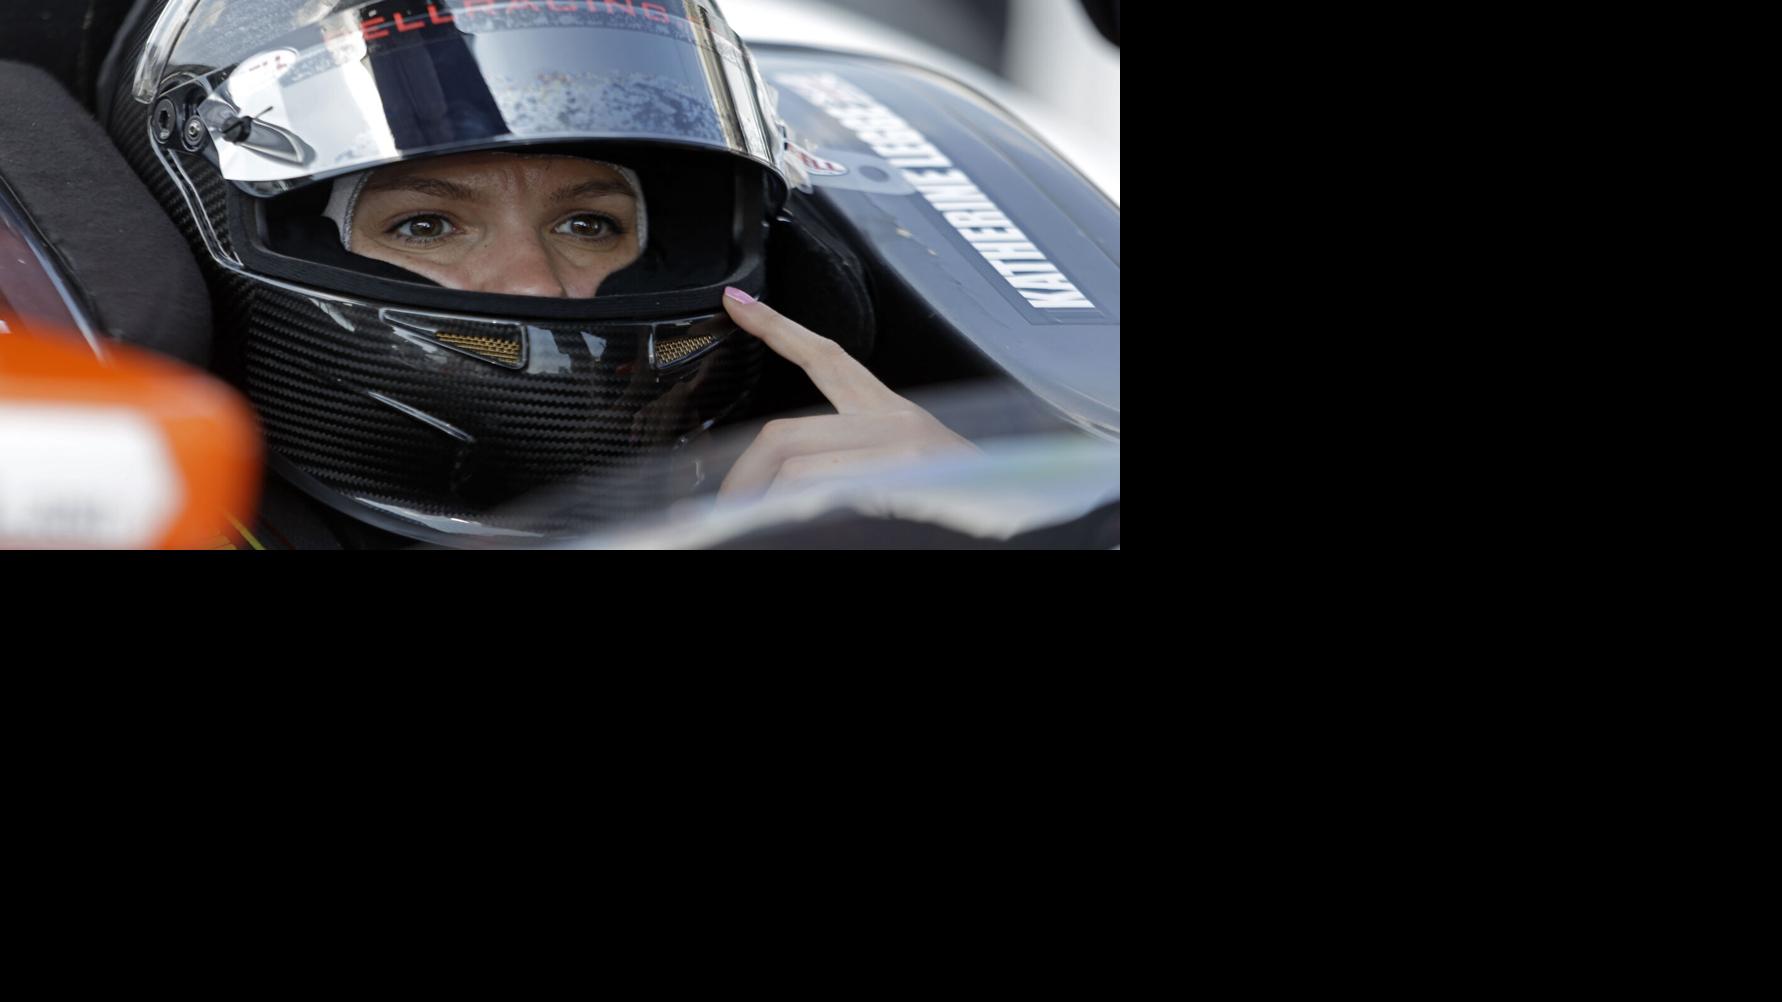 Katherine Legge to return to Indy 500 with Rahal team